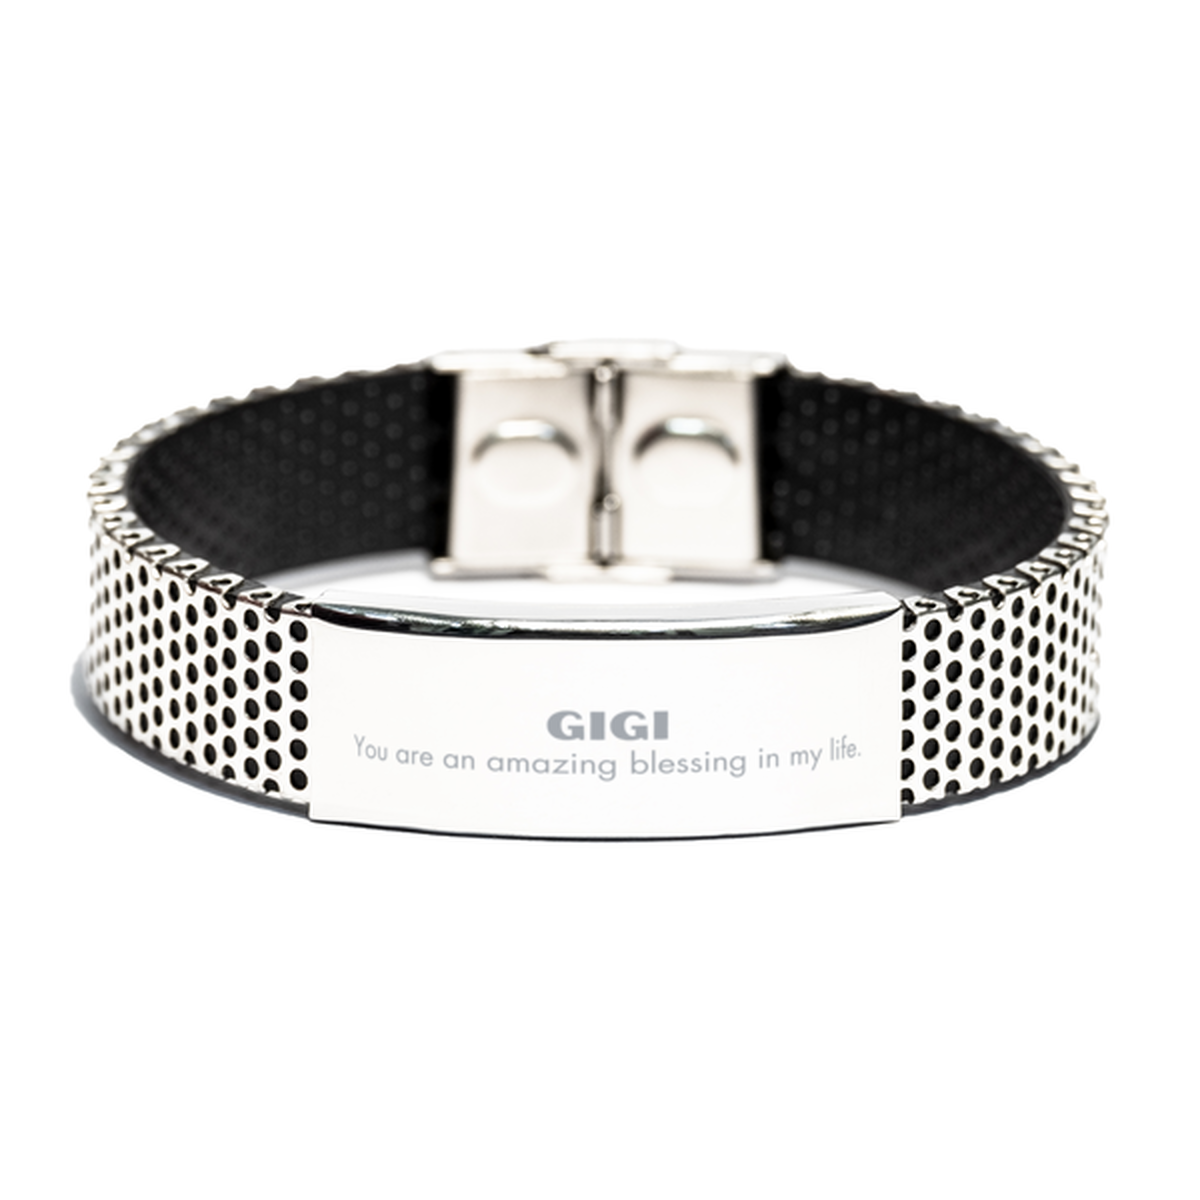 Gigi Stainless Steel Bracelet, You are an amazing blessing in my life, Thank You Gifts For Gigi, Inspirational Birthday Christmas Unique Gifts For Gigi